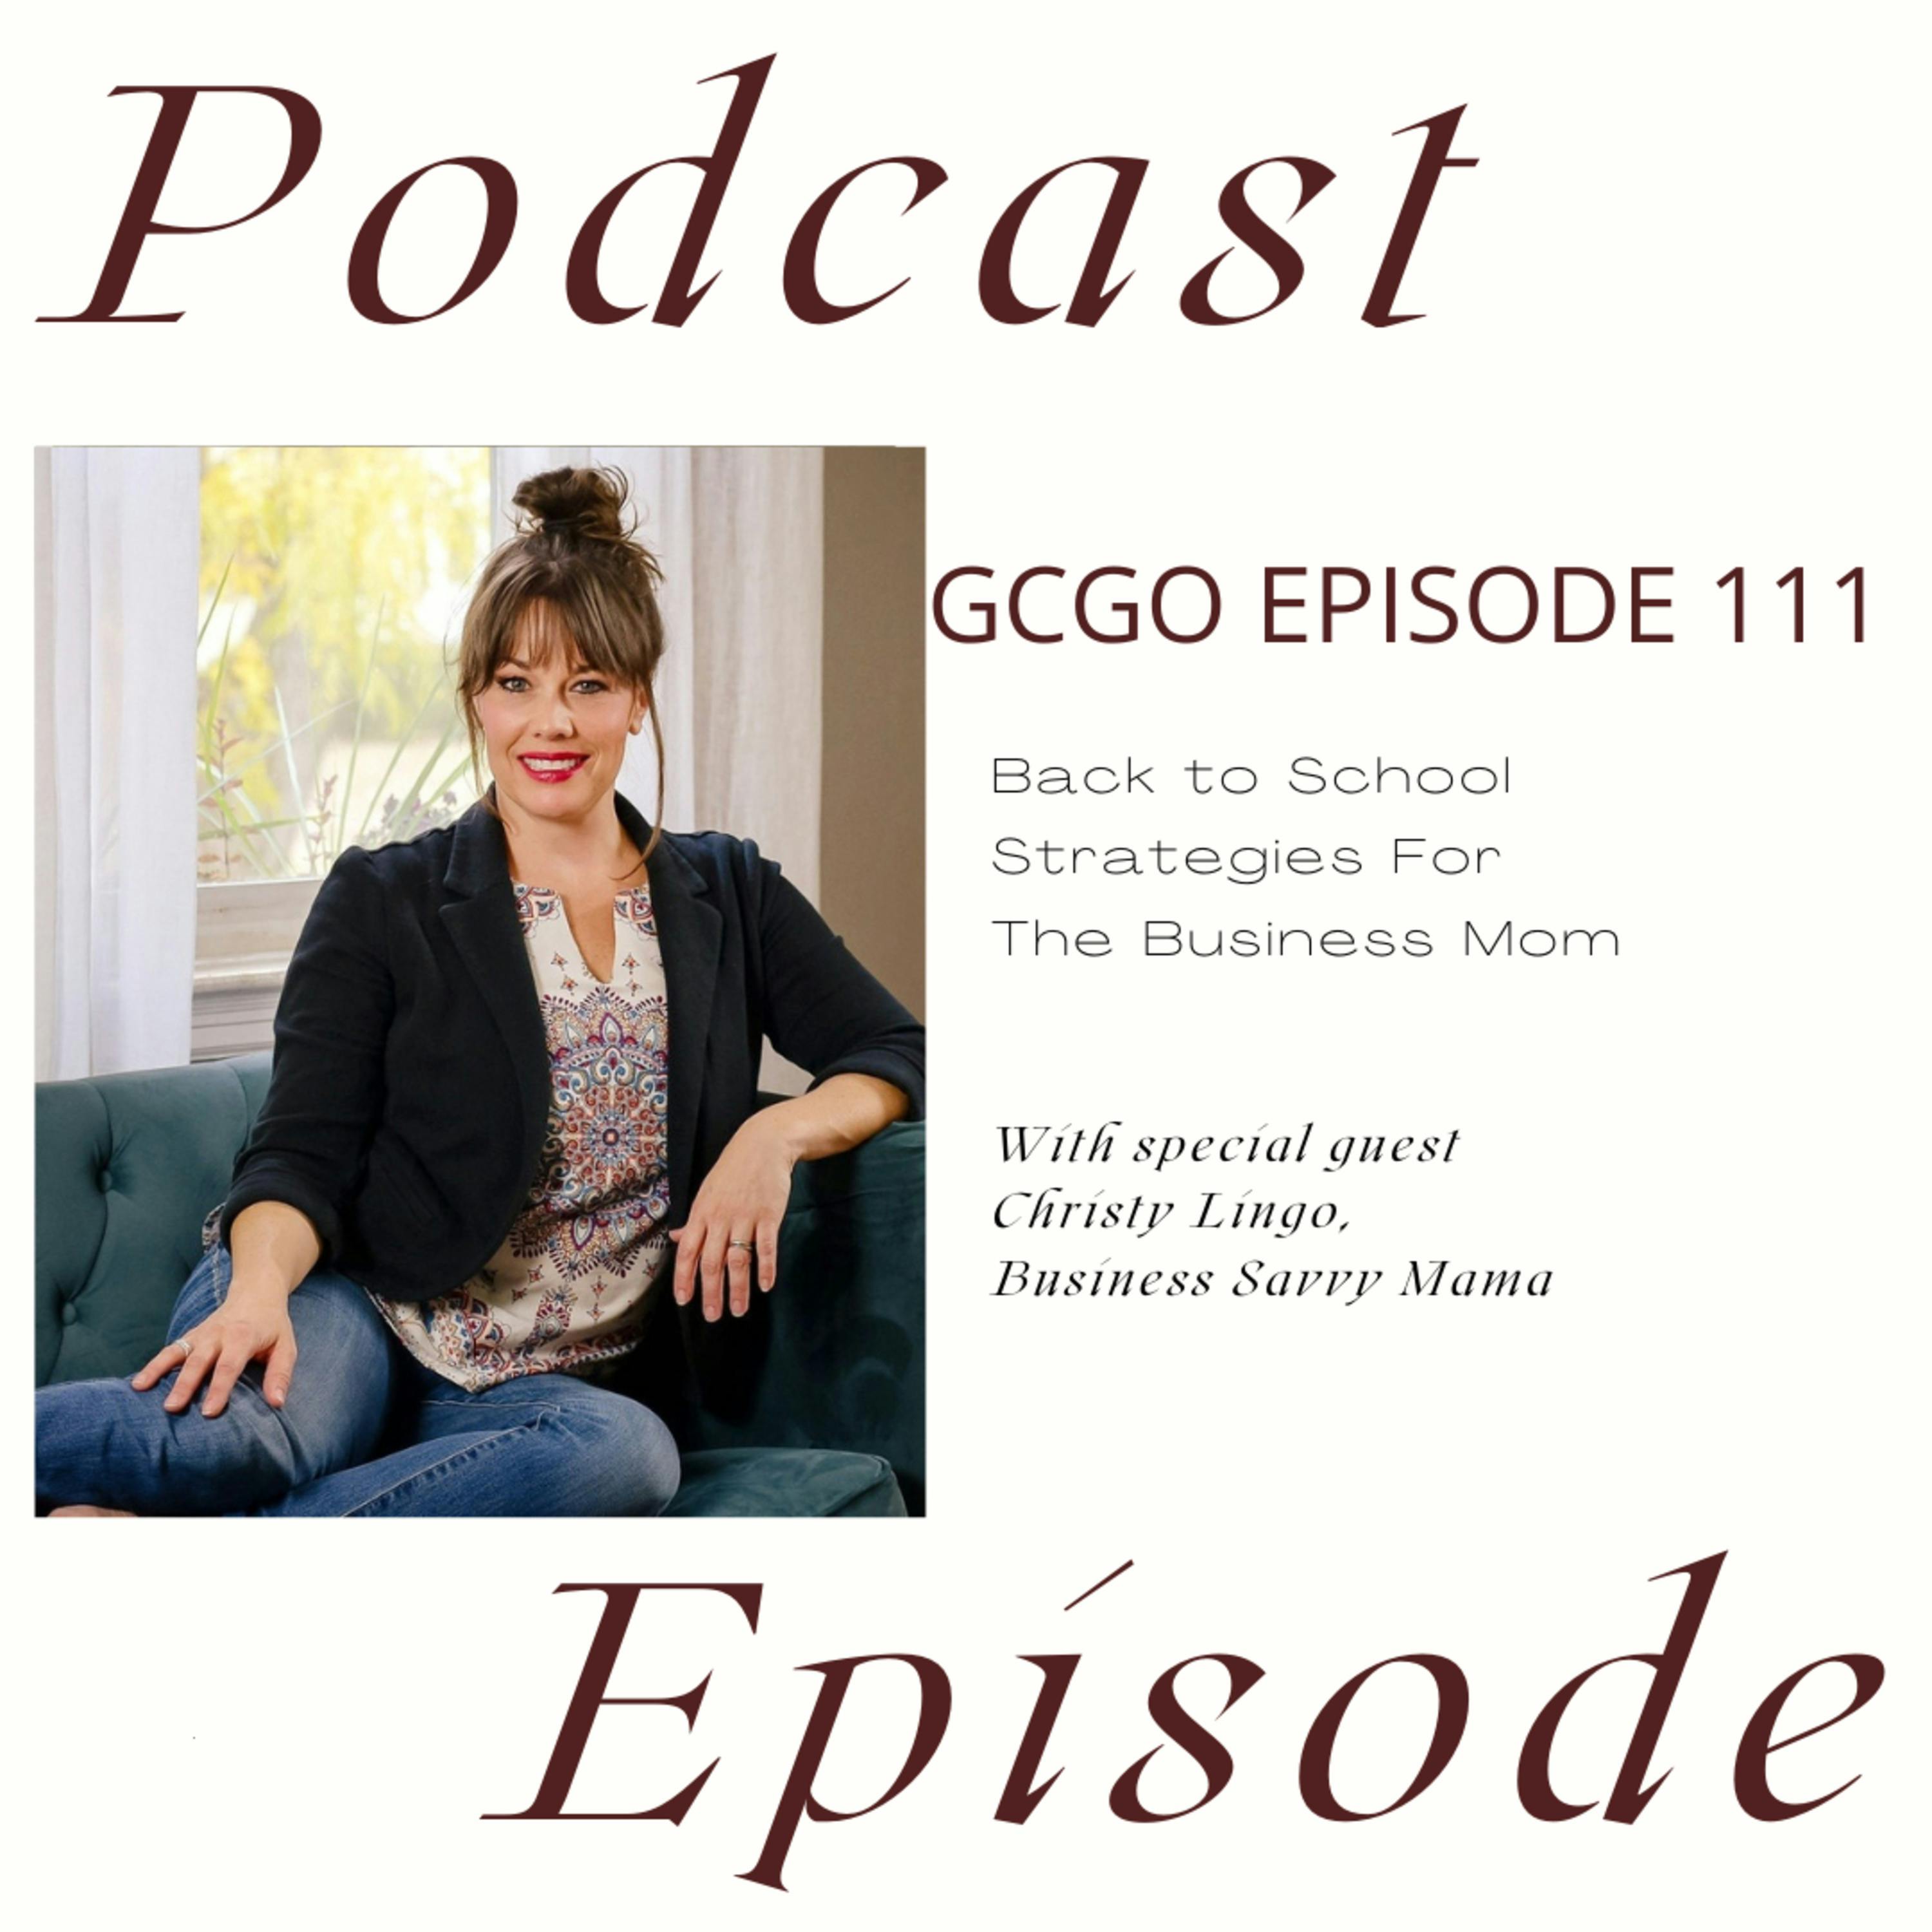 Back To School Strategies For The Business Mom with Christy Lingo